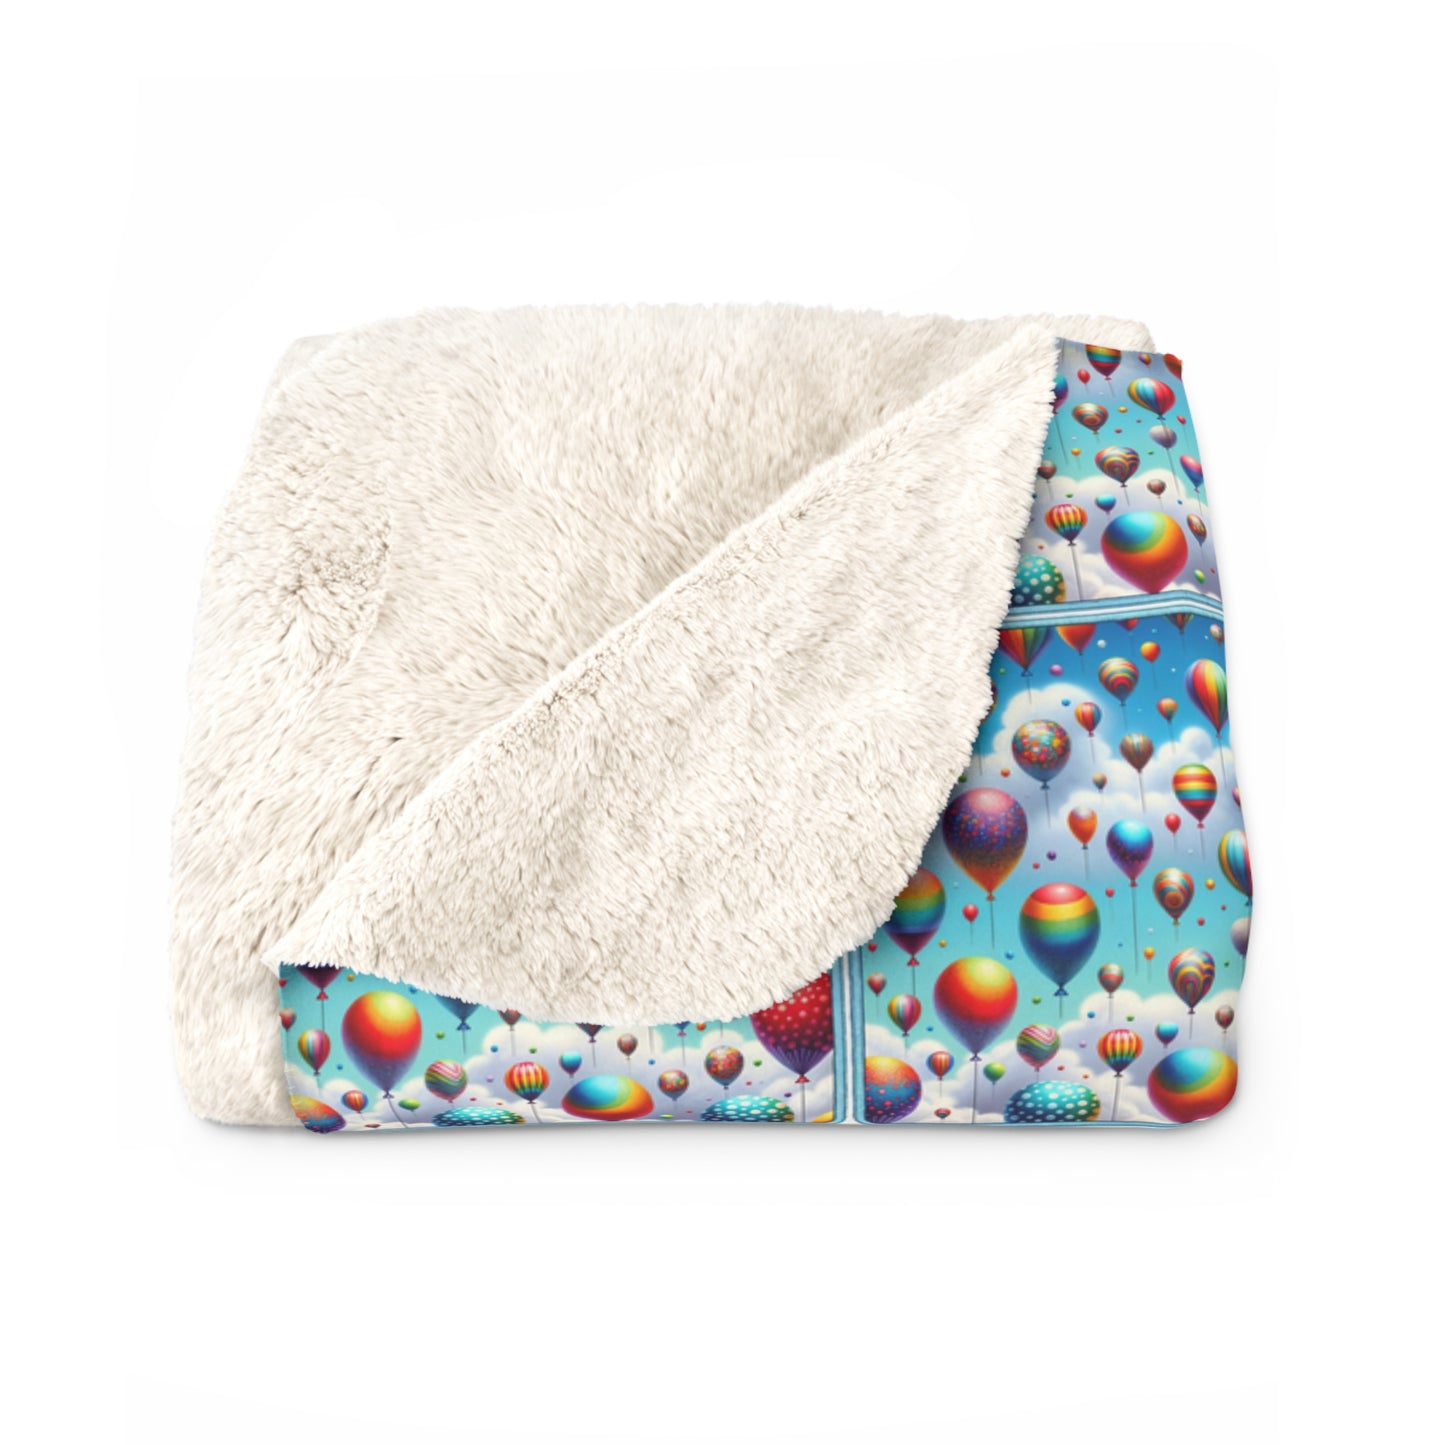 Up, Up, and Away Sherpa Fleece Blanket - Colorful Floating Balloons Design